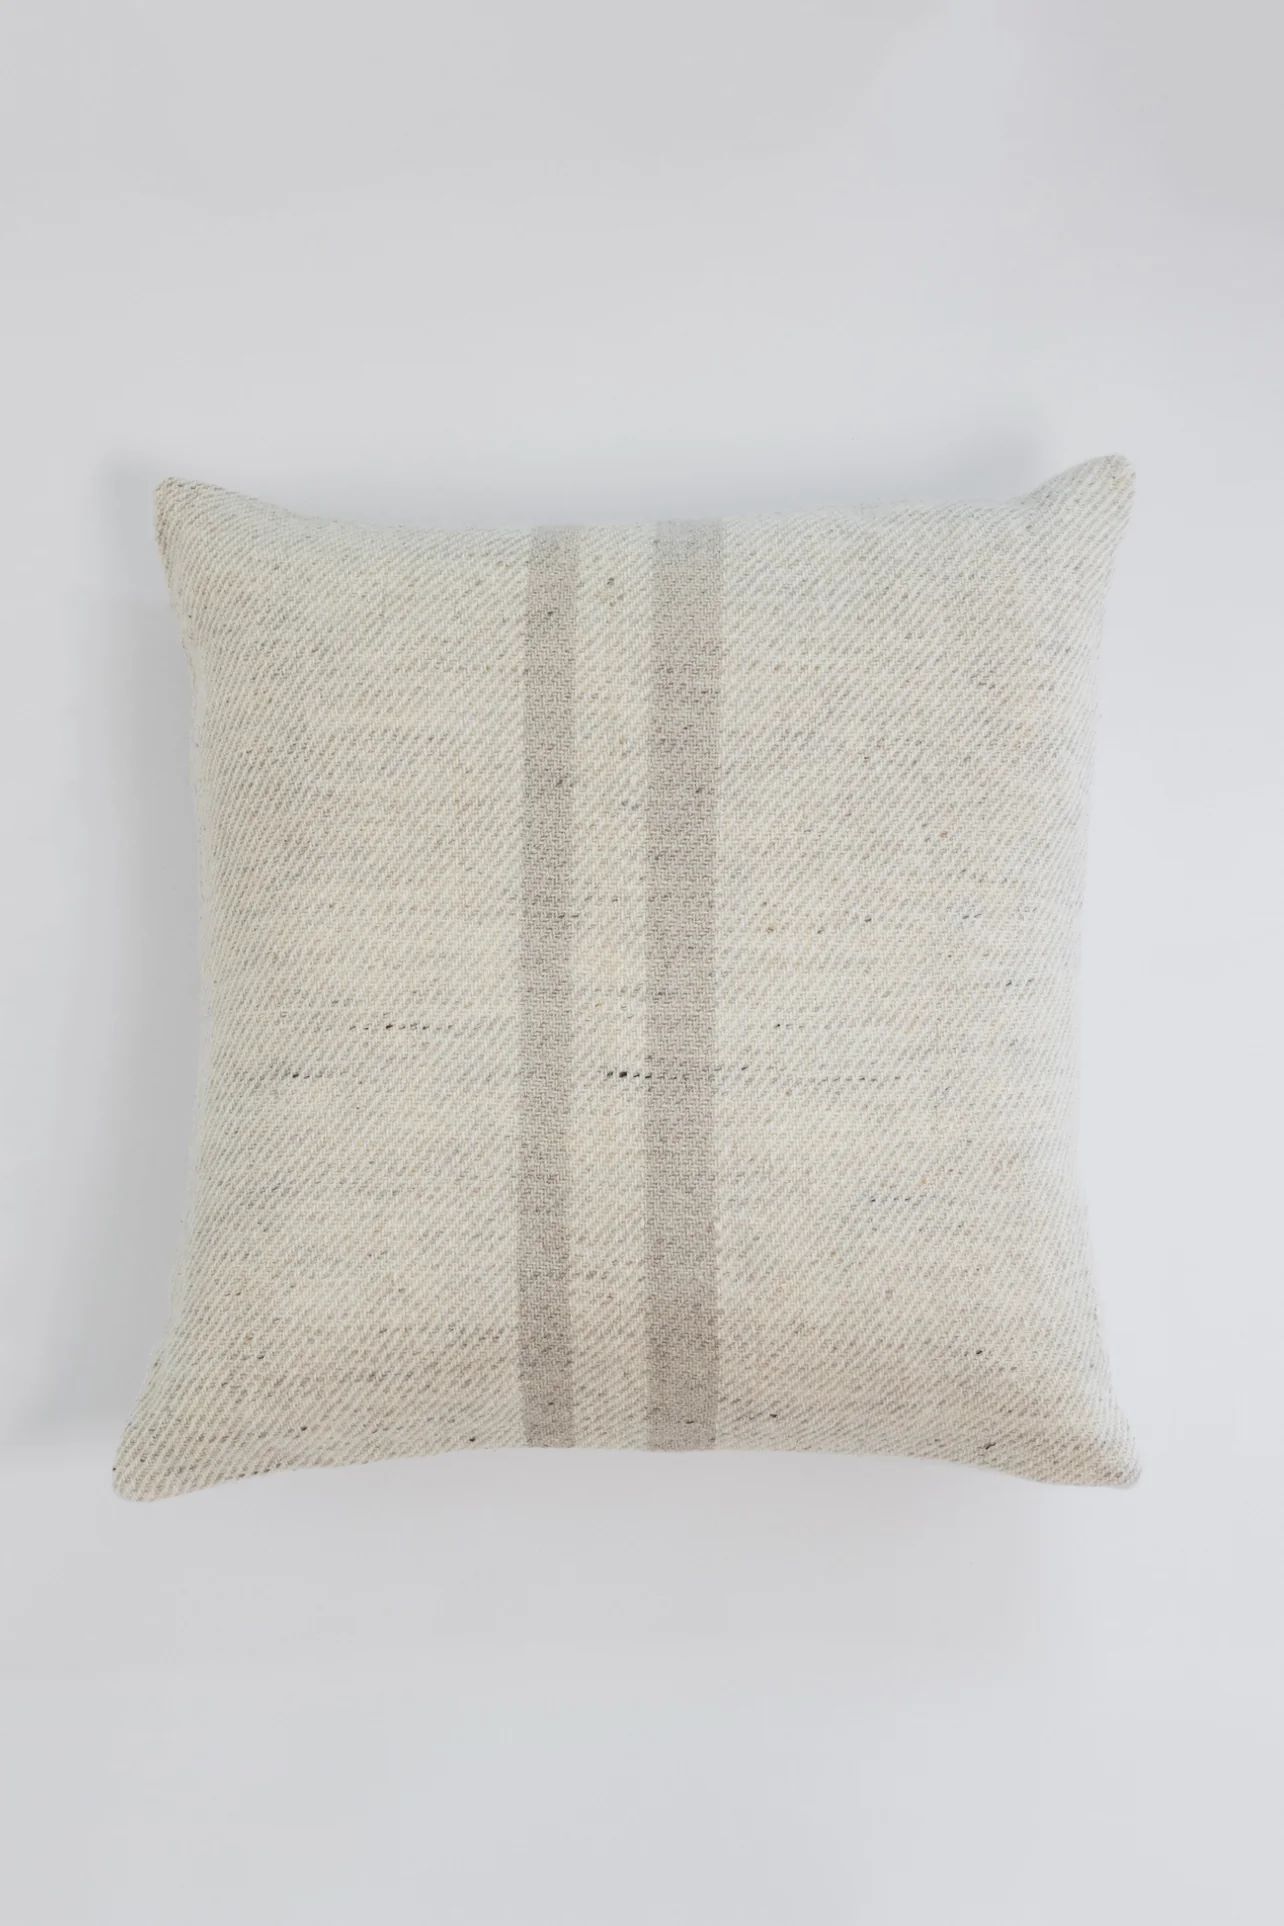 Dulce Striped Pillow - Ivory | THELIFESTYLEDCO